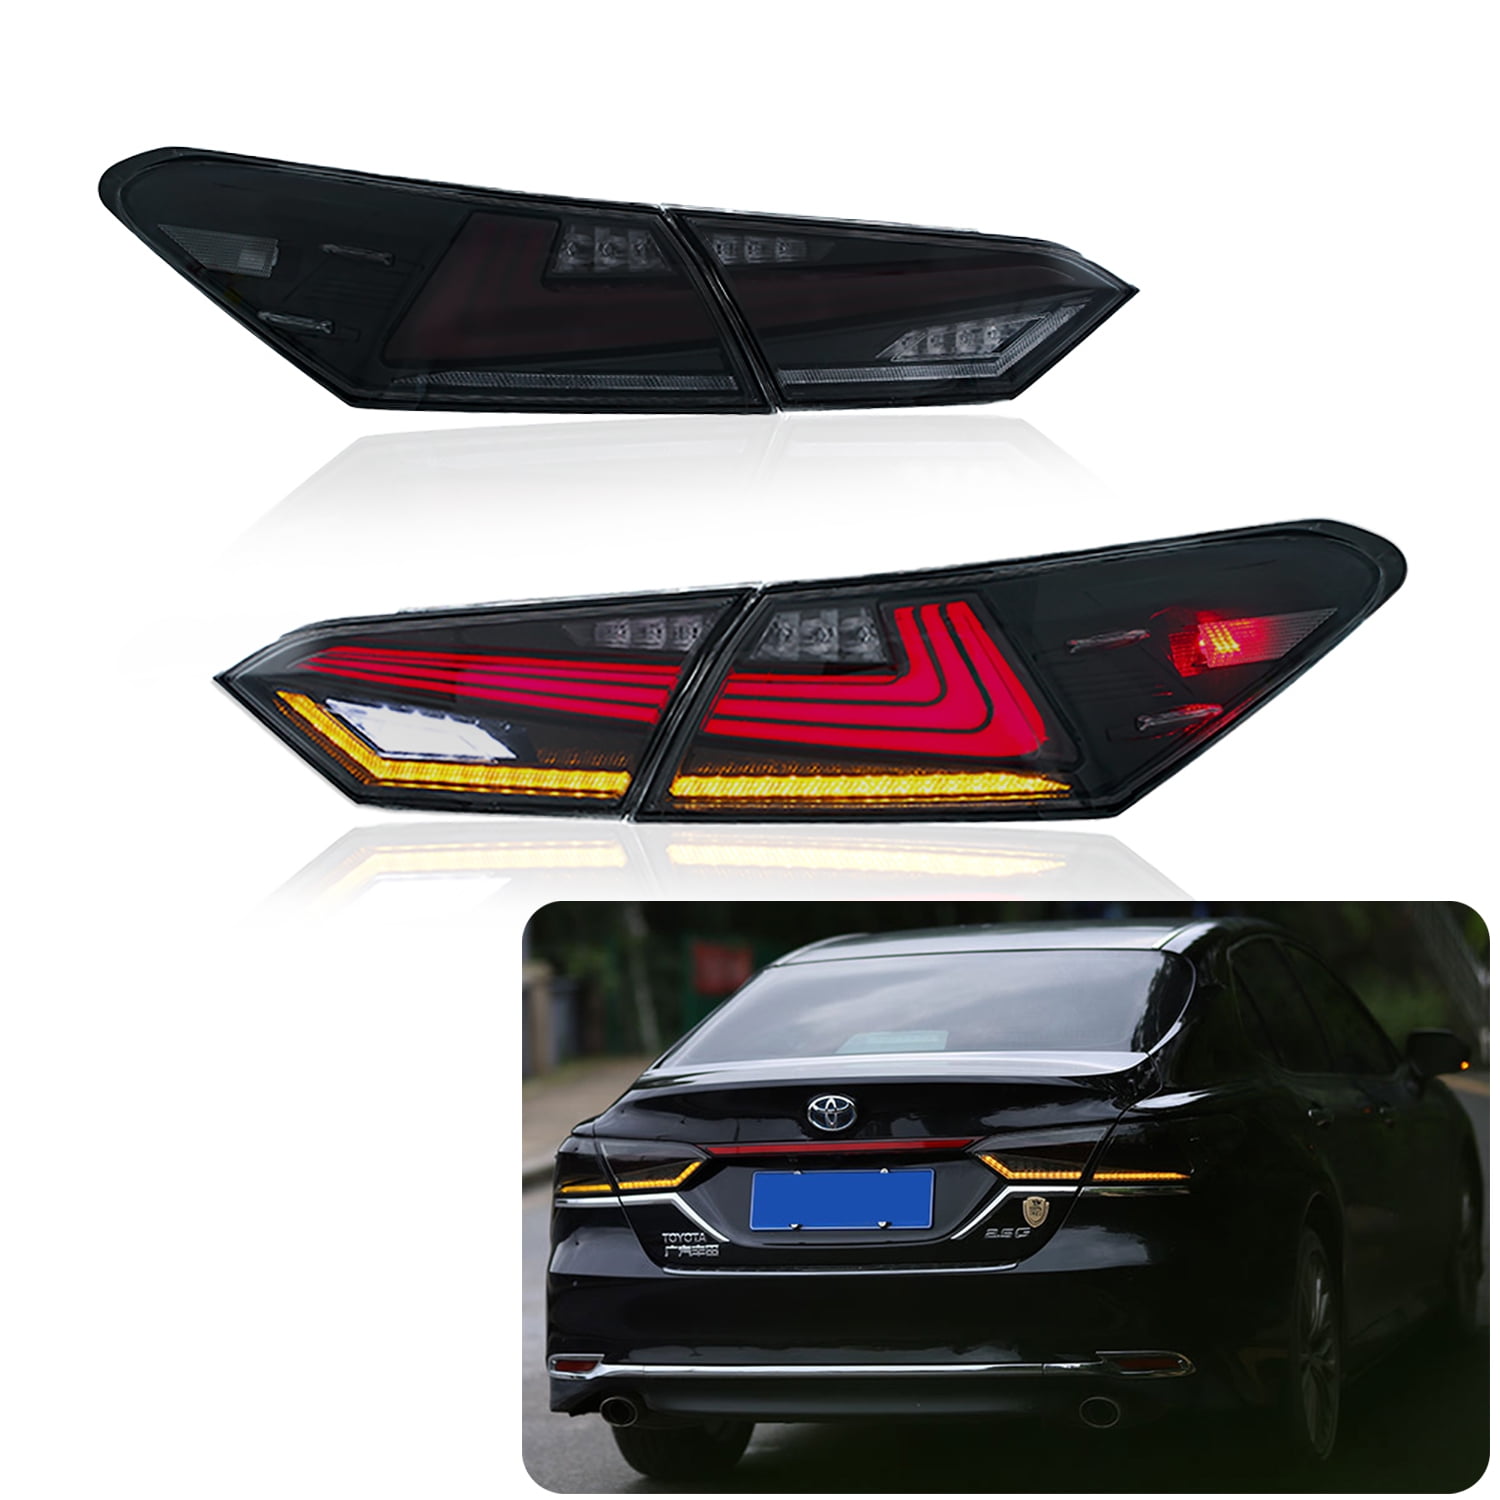 Inginuity Time LED Tail Lights For Toyota Camry 2018 2019 2020